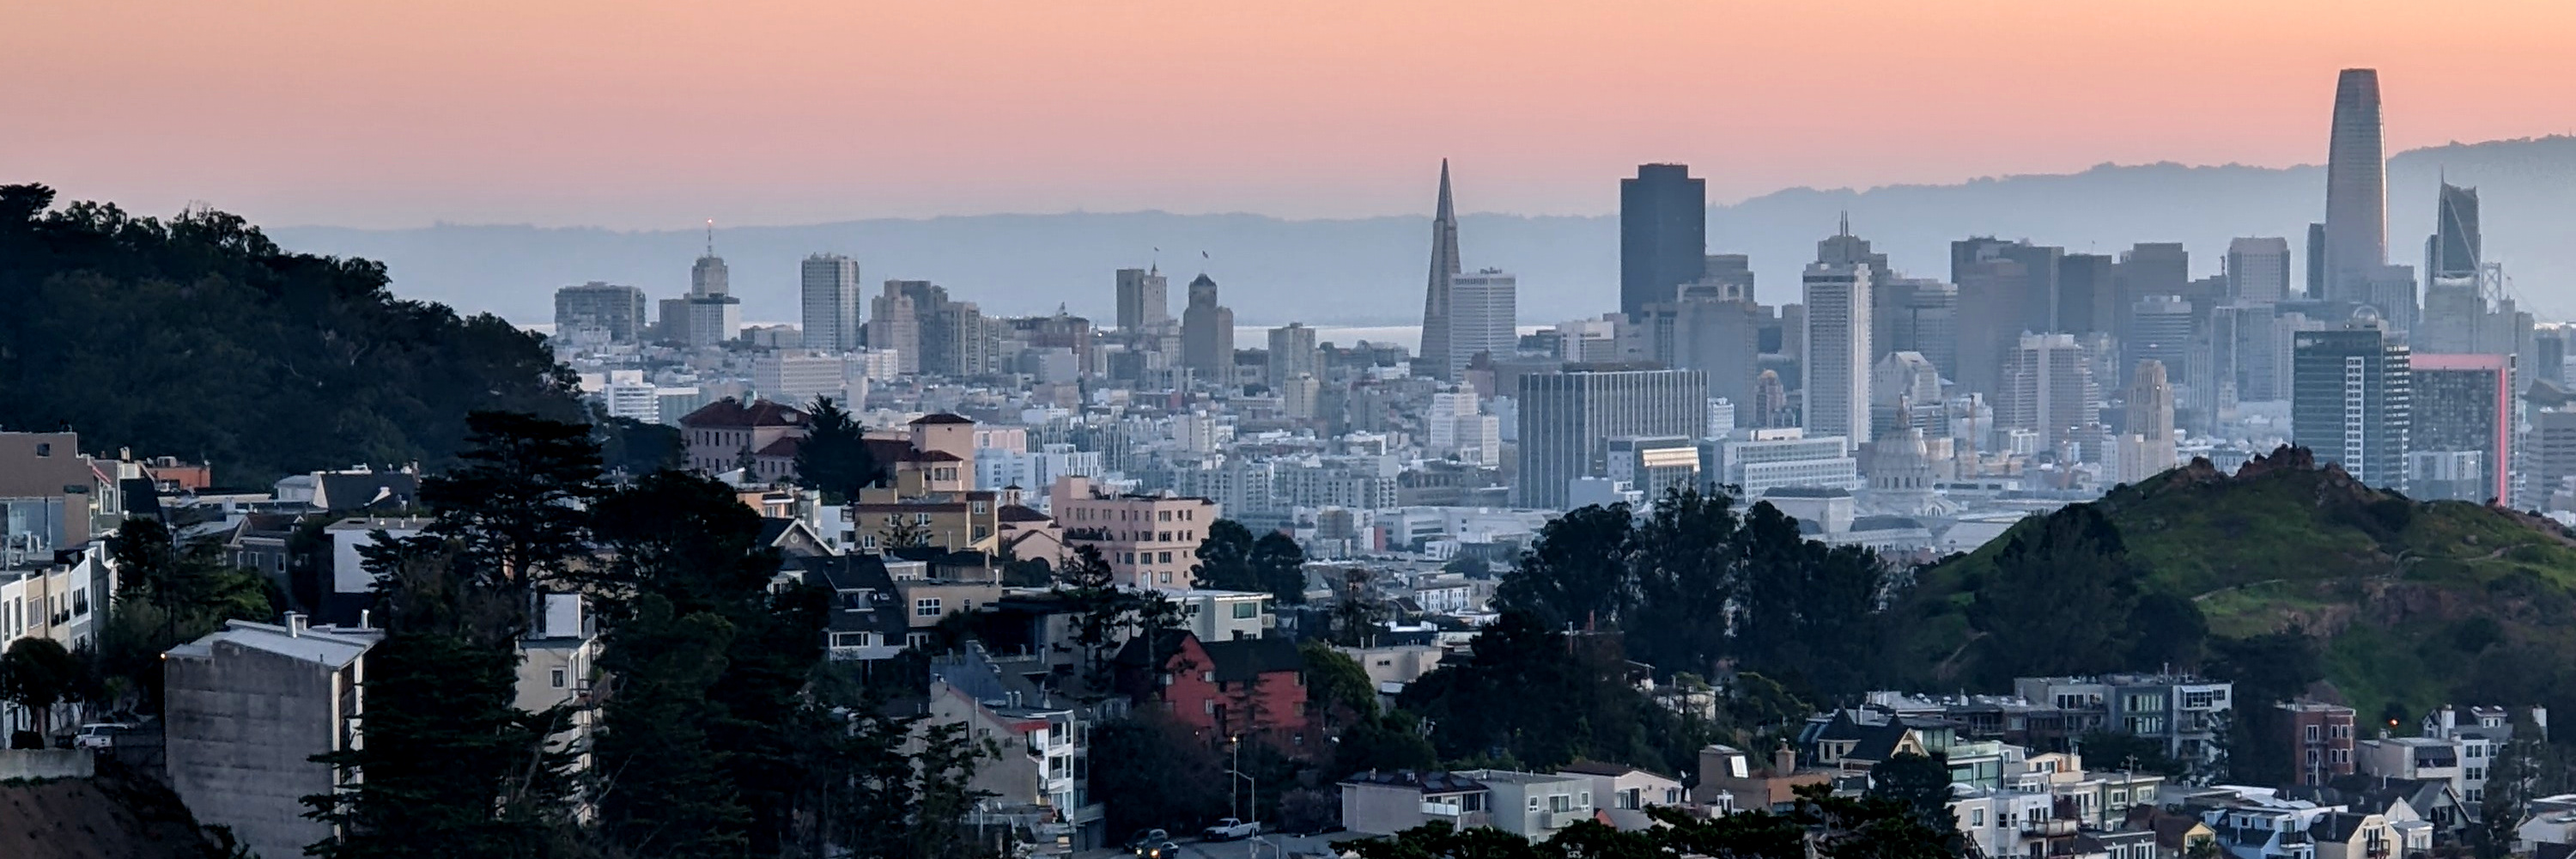 view from San Francisco's Tank Hill just before sunrise